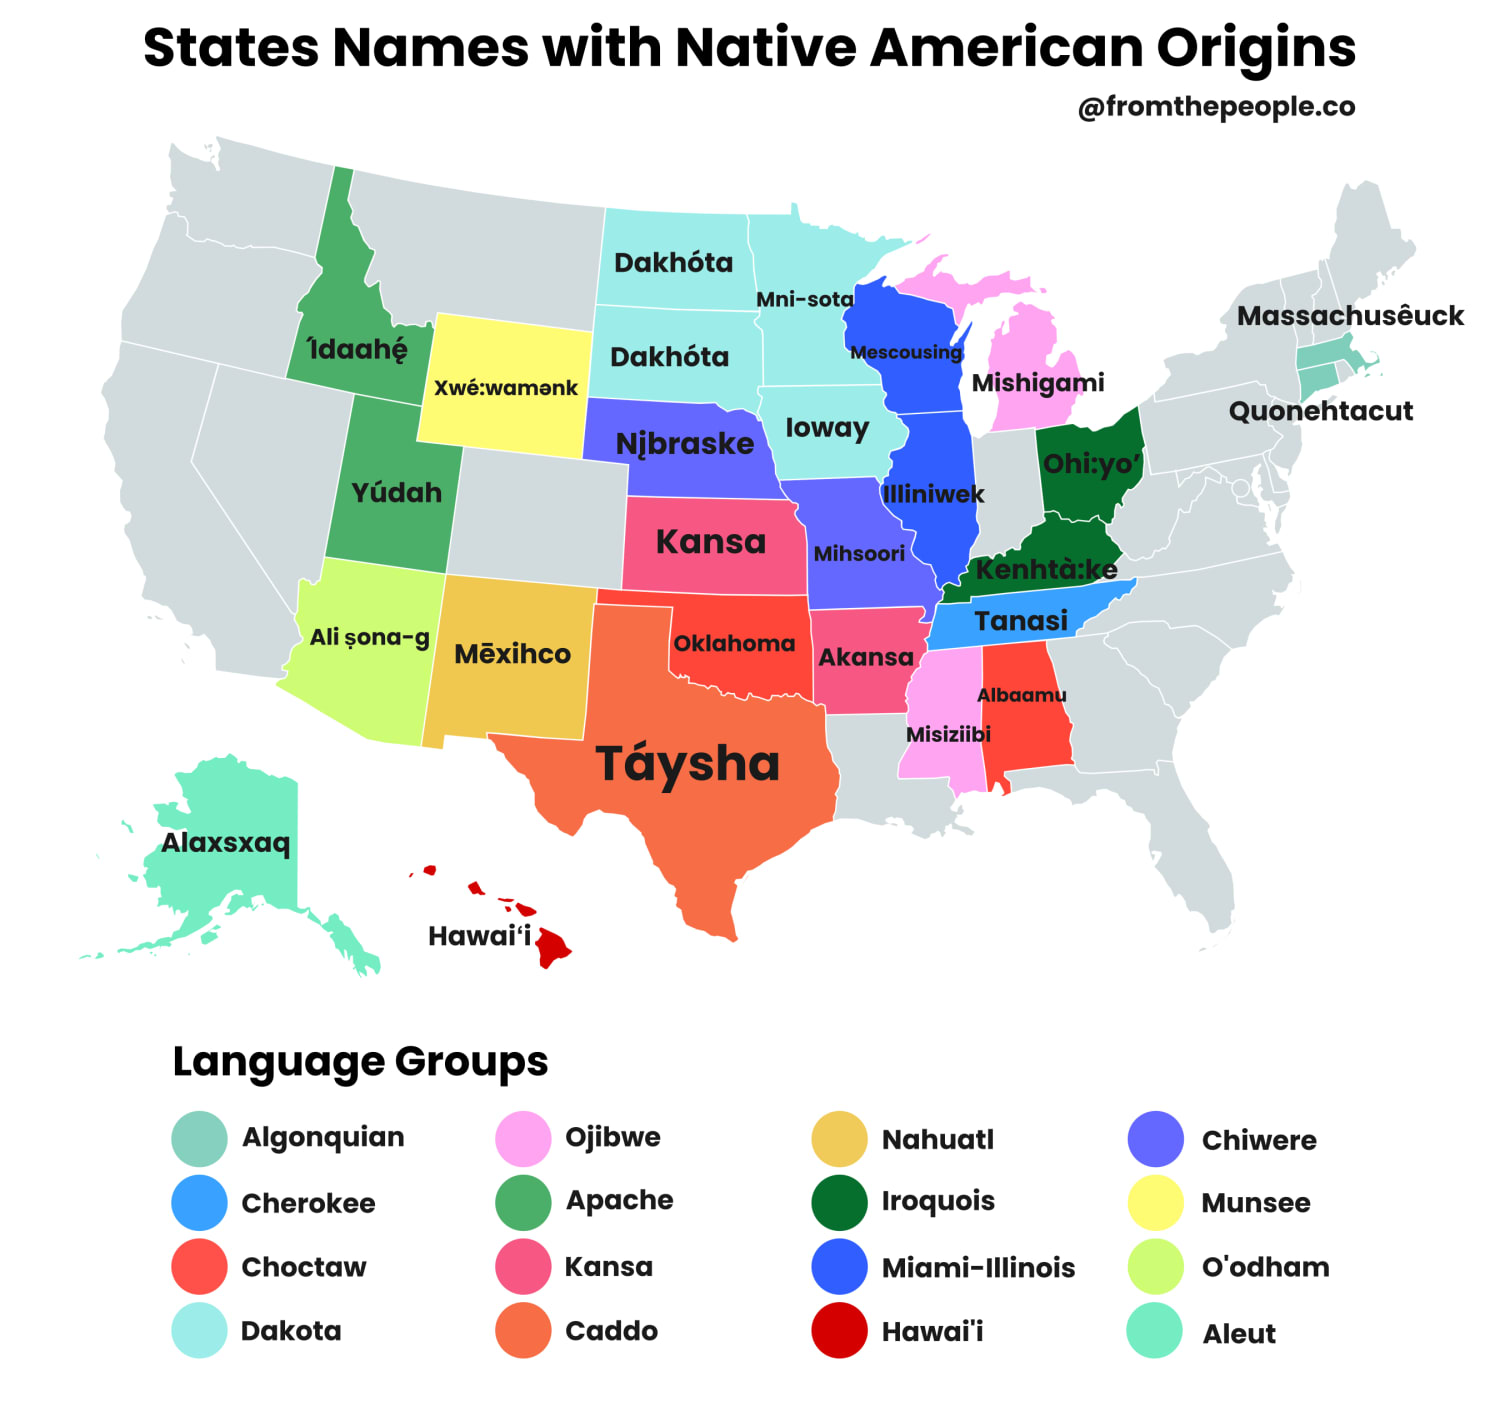 The majority of state names have Native American origins